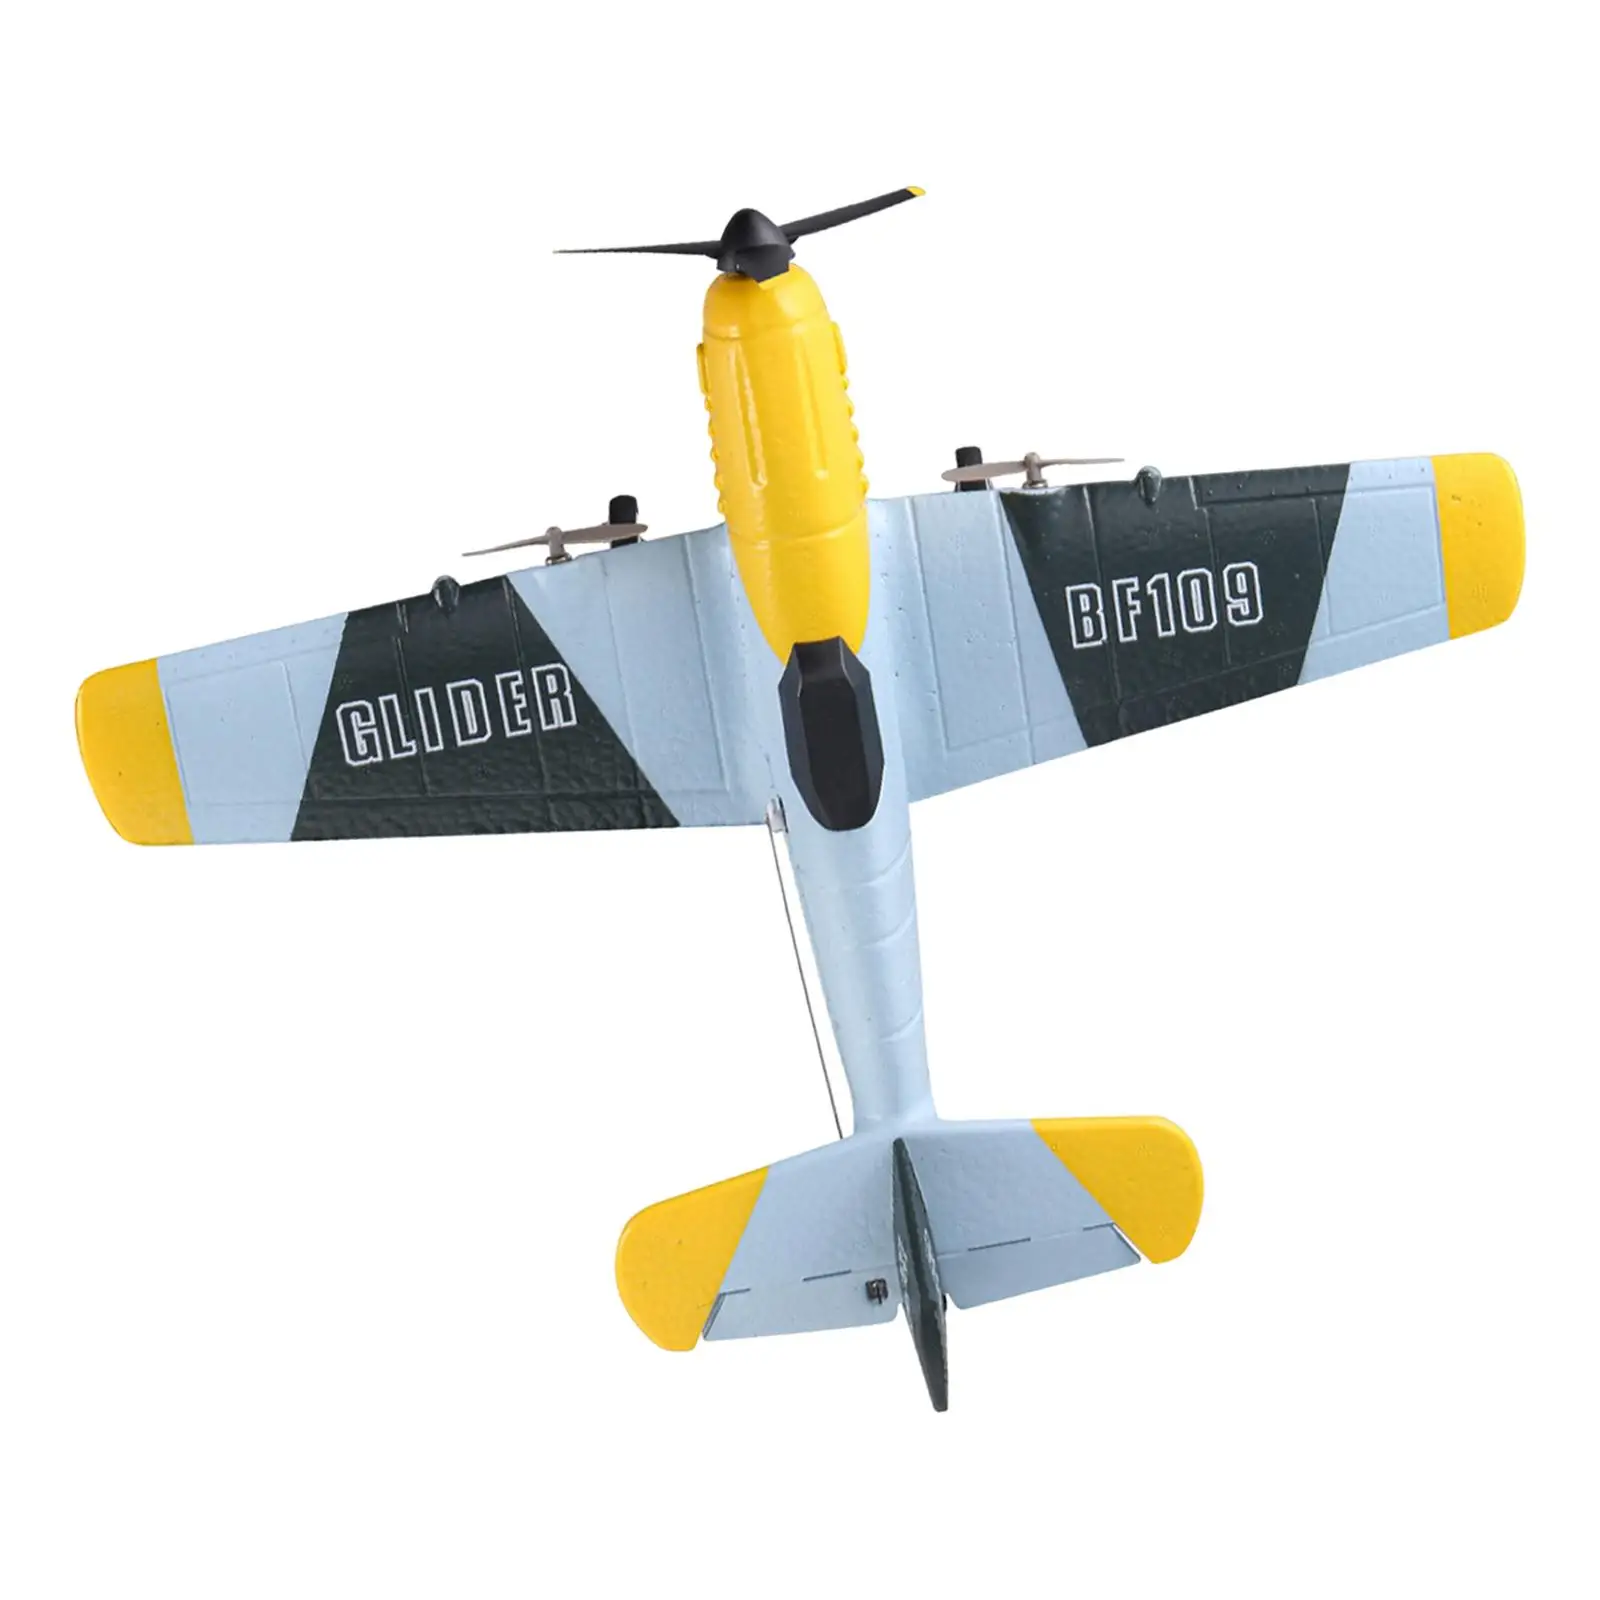 3 CH RC Plane Outdoor Flighting Toys Gift Lightweight Remote Control Airplane Hobby RC Glider for Boys Girls Adults Beginner